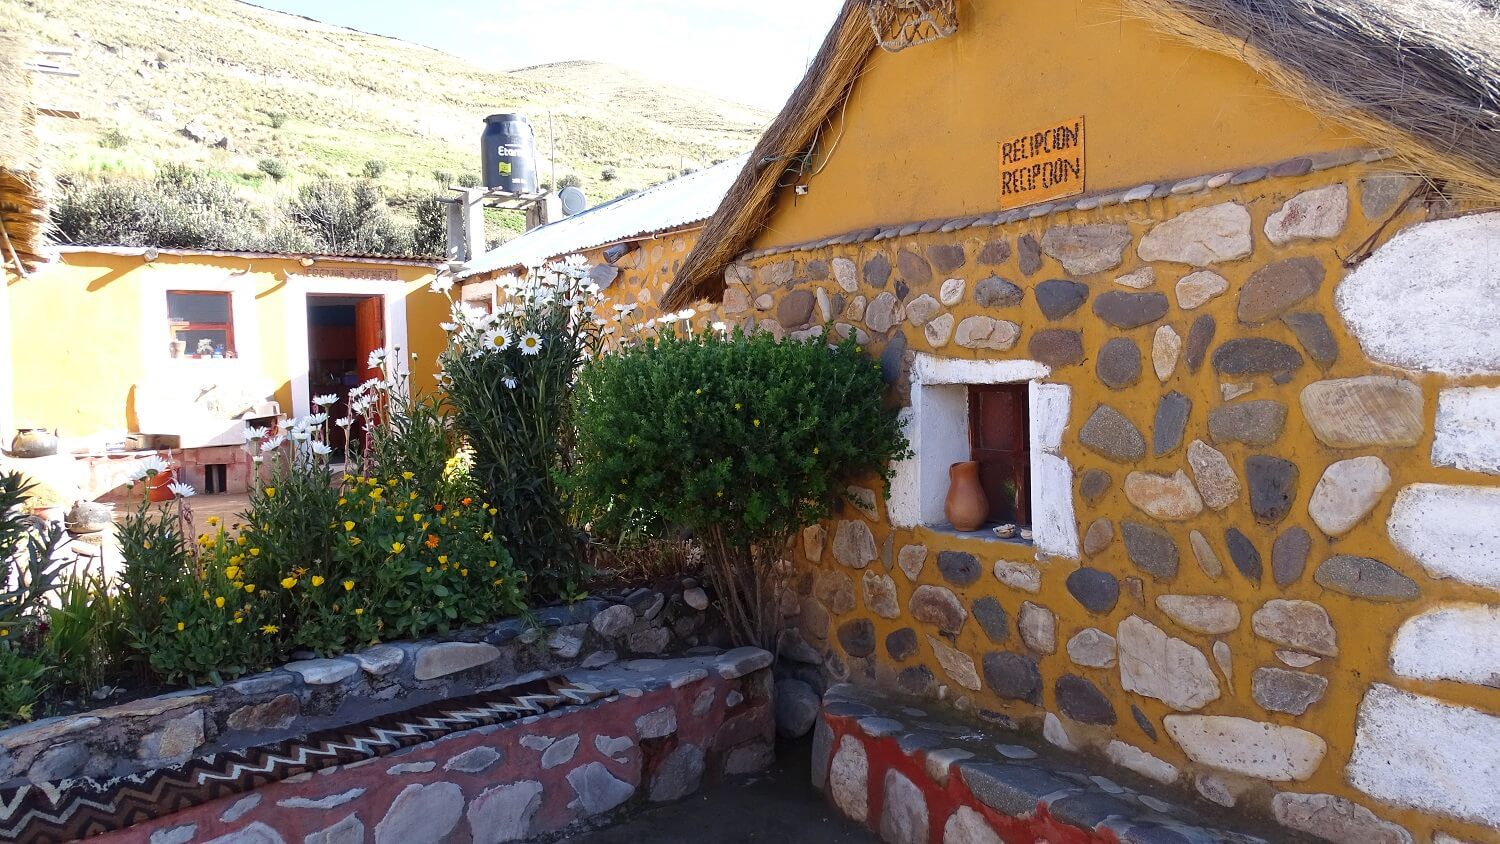 Homestay of a local family in Sibayo. Book Community-Based Tourism in the Colca Canyon with RESPONSible Travel Peru